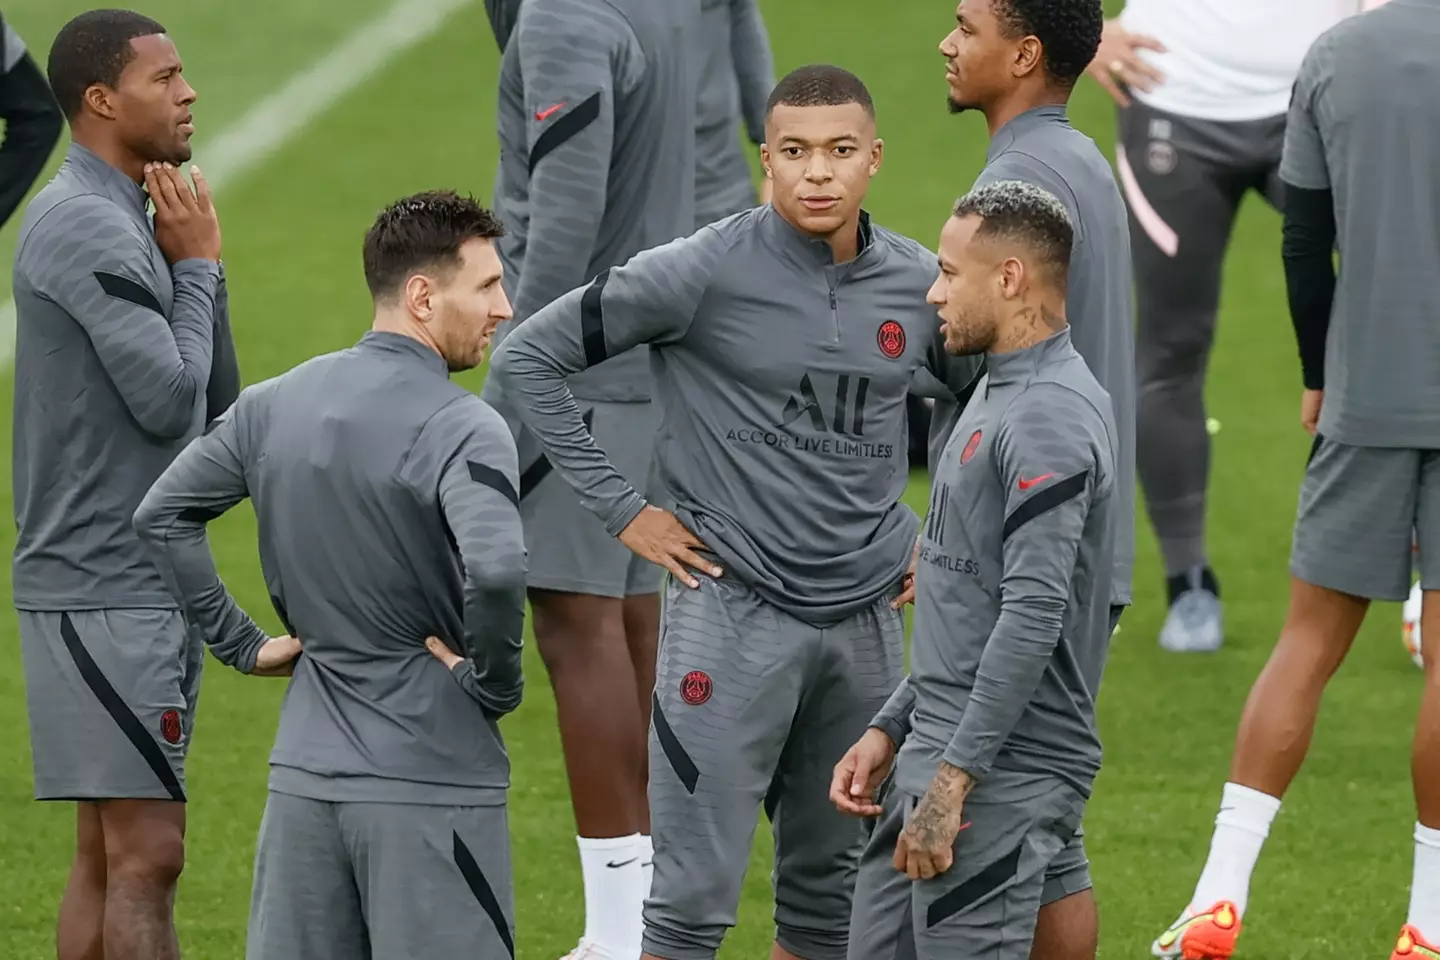 Neymar, Messi and Mbappe could all start against City. Image: PA Images